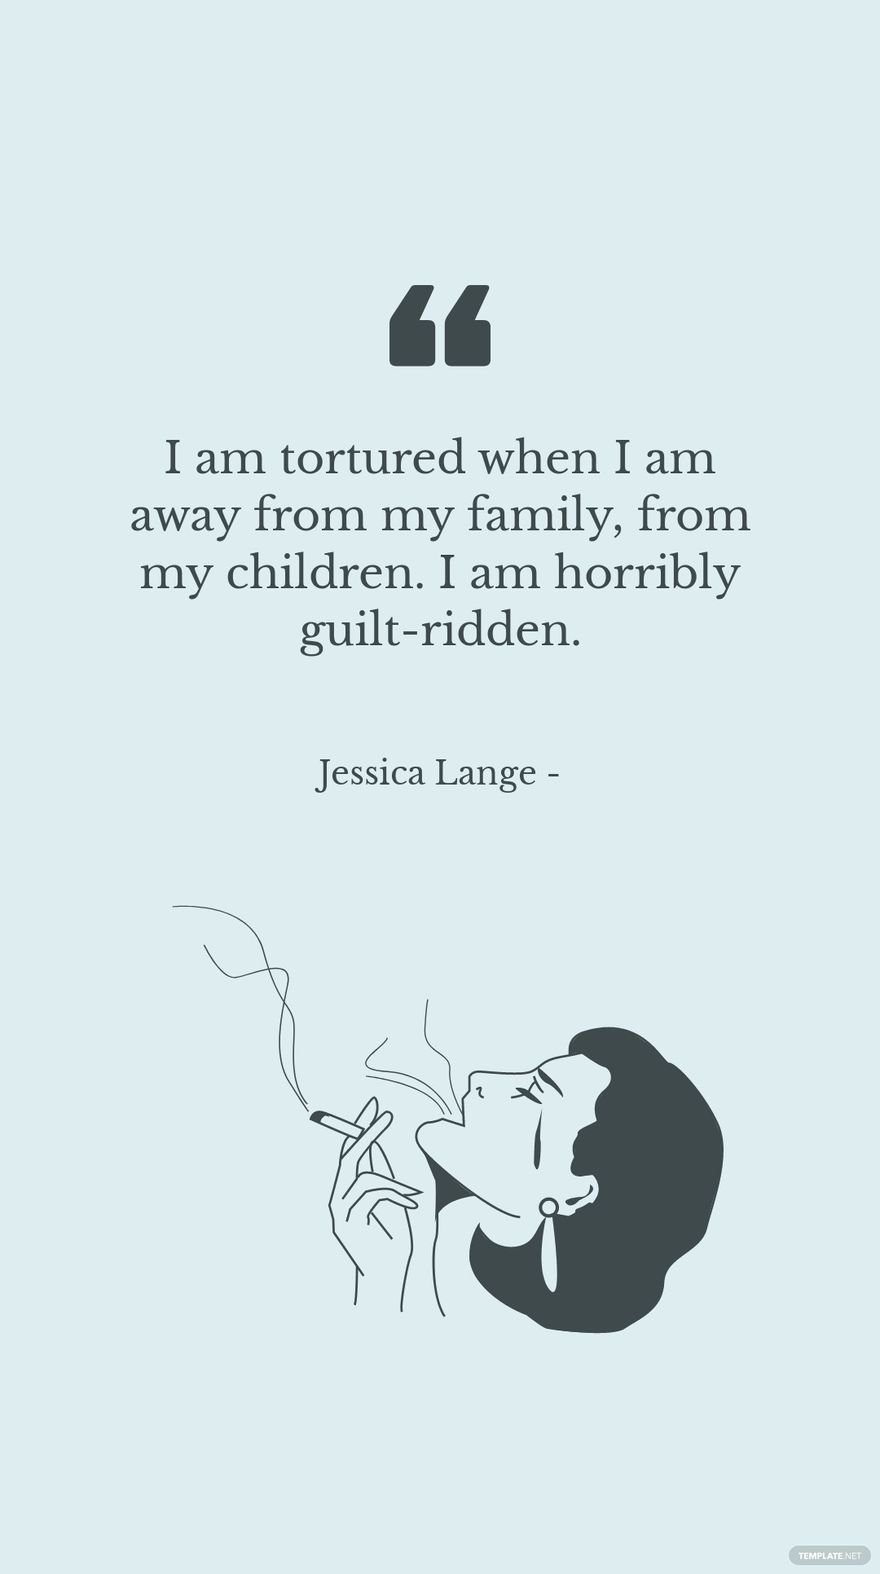 Free Jessica Lange - I am tortured when I am away from my family, from my children. I am horribly guilt-ridden.